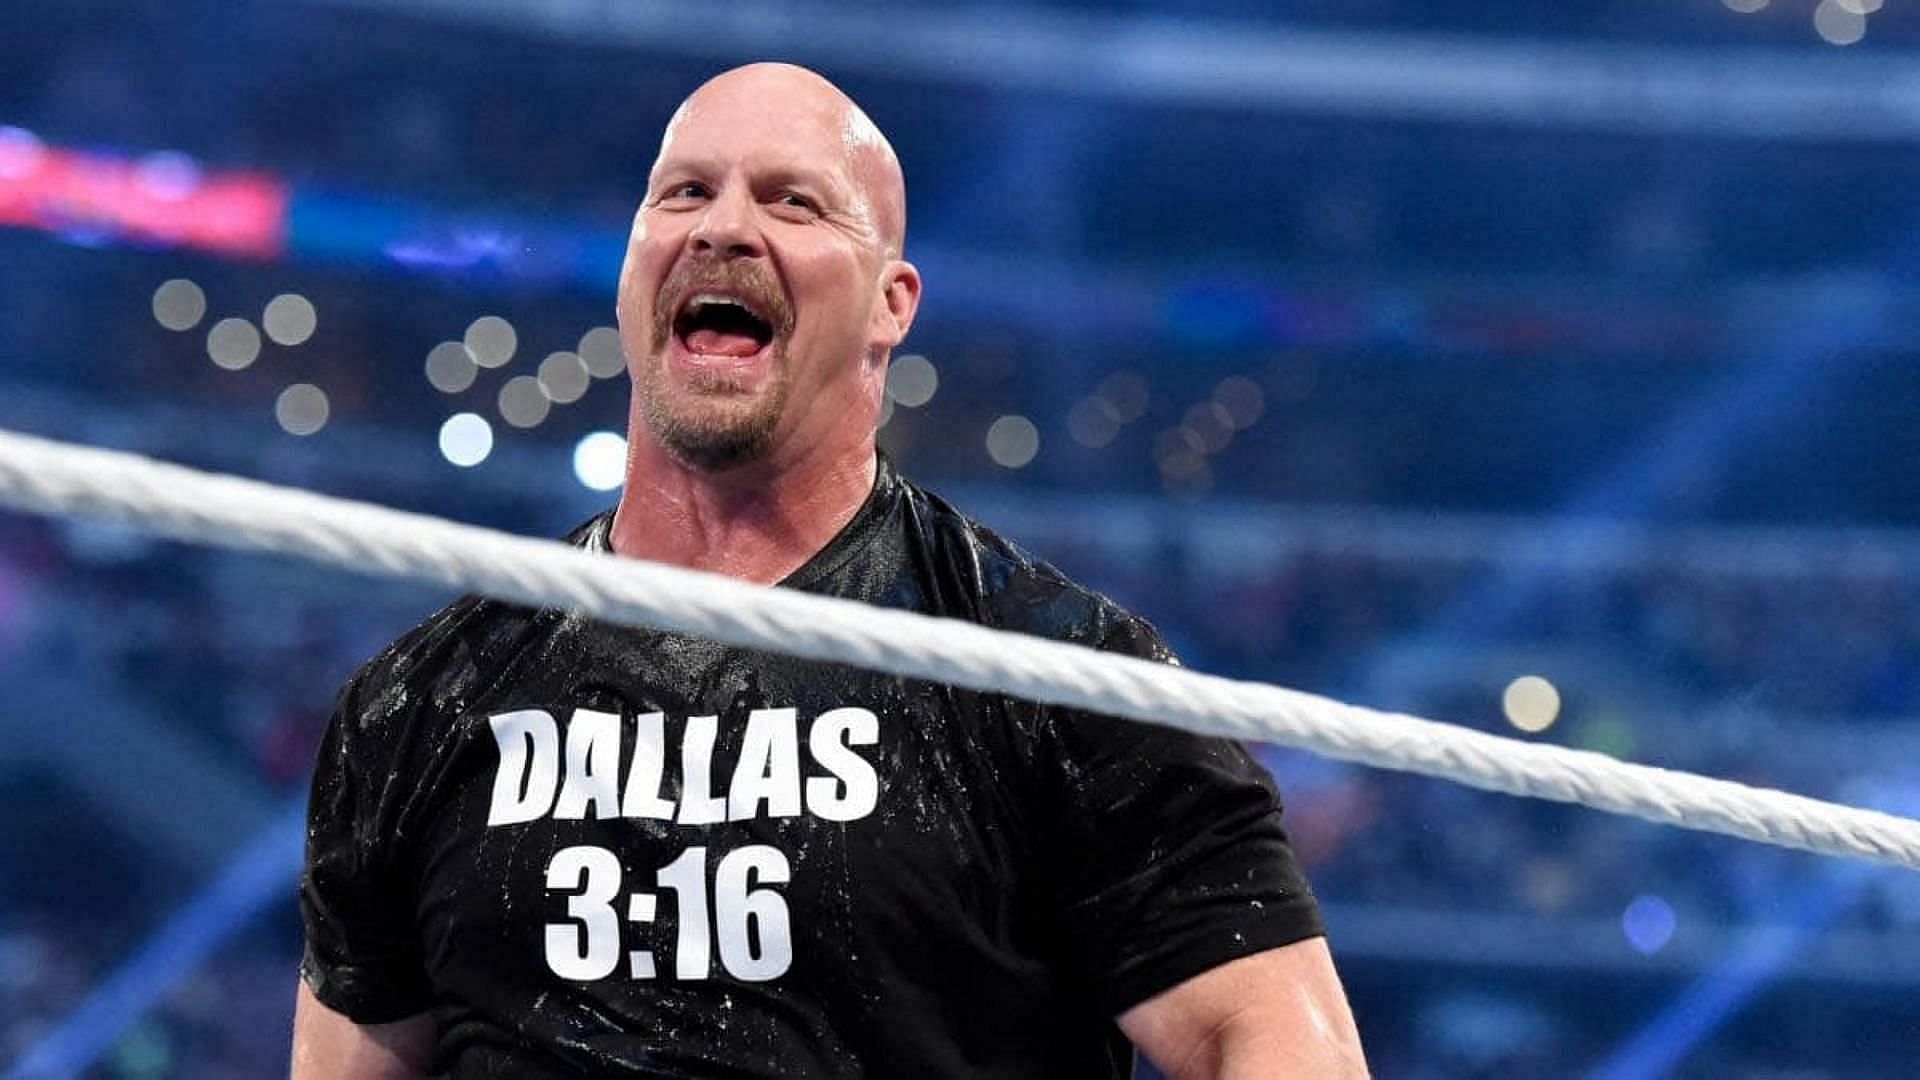 Stone Cold Steve Austin will feature on The Kevin Owens Show at WrestleMania 38.